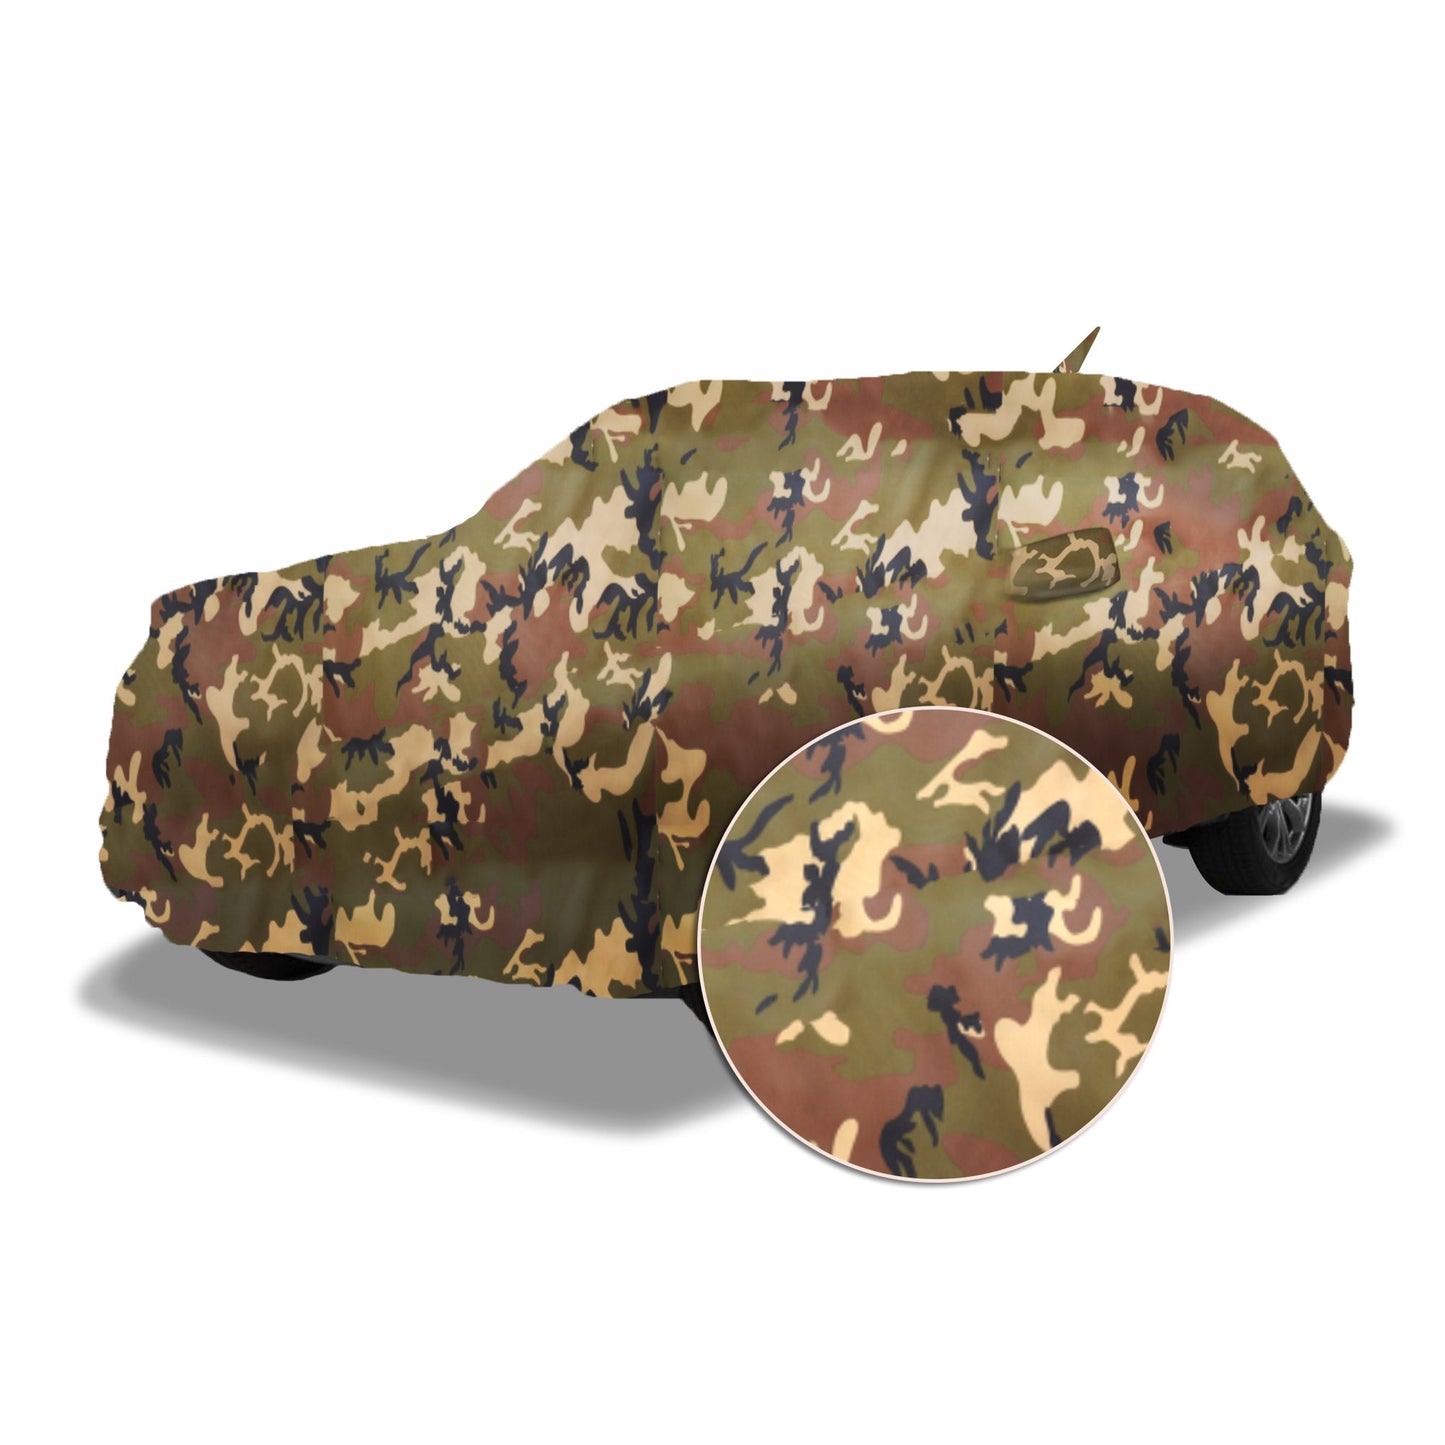 Ascot Mercedes-Benz GLC Coupe Car Body Cover 2015-2023 Model Extra Strong & Dust Proof Jungle Military Car Cover with UV & Water-Resistant Coating